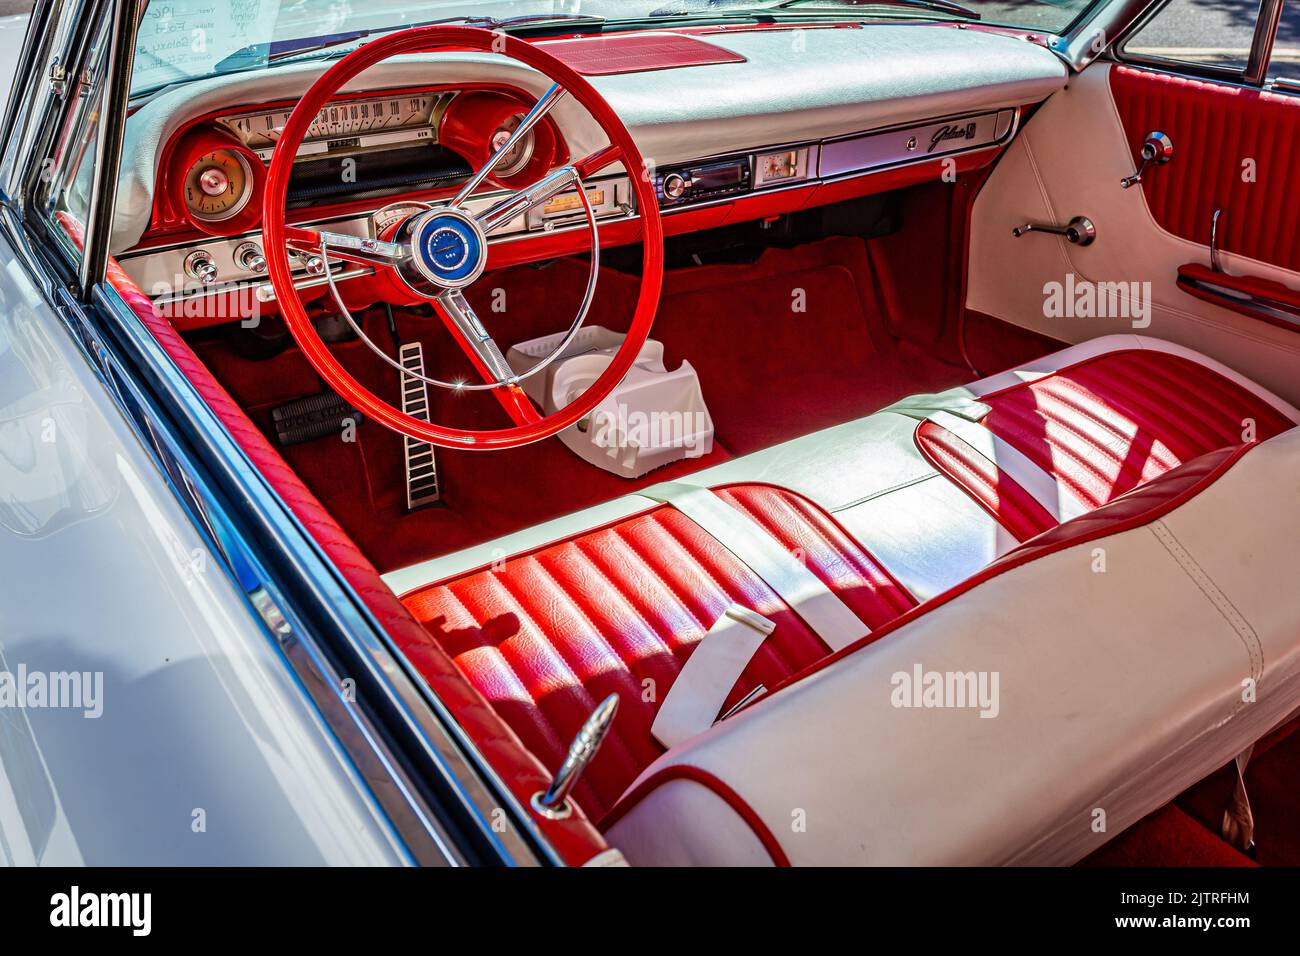 Fernandina Beach, FL - October 18, 2014: Wide angle interior view of a 1964 Ford Galaxie 500XL Hardtop at a downtown classic car show. Stock Photo